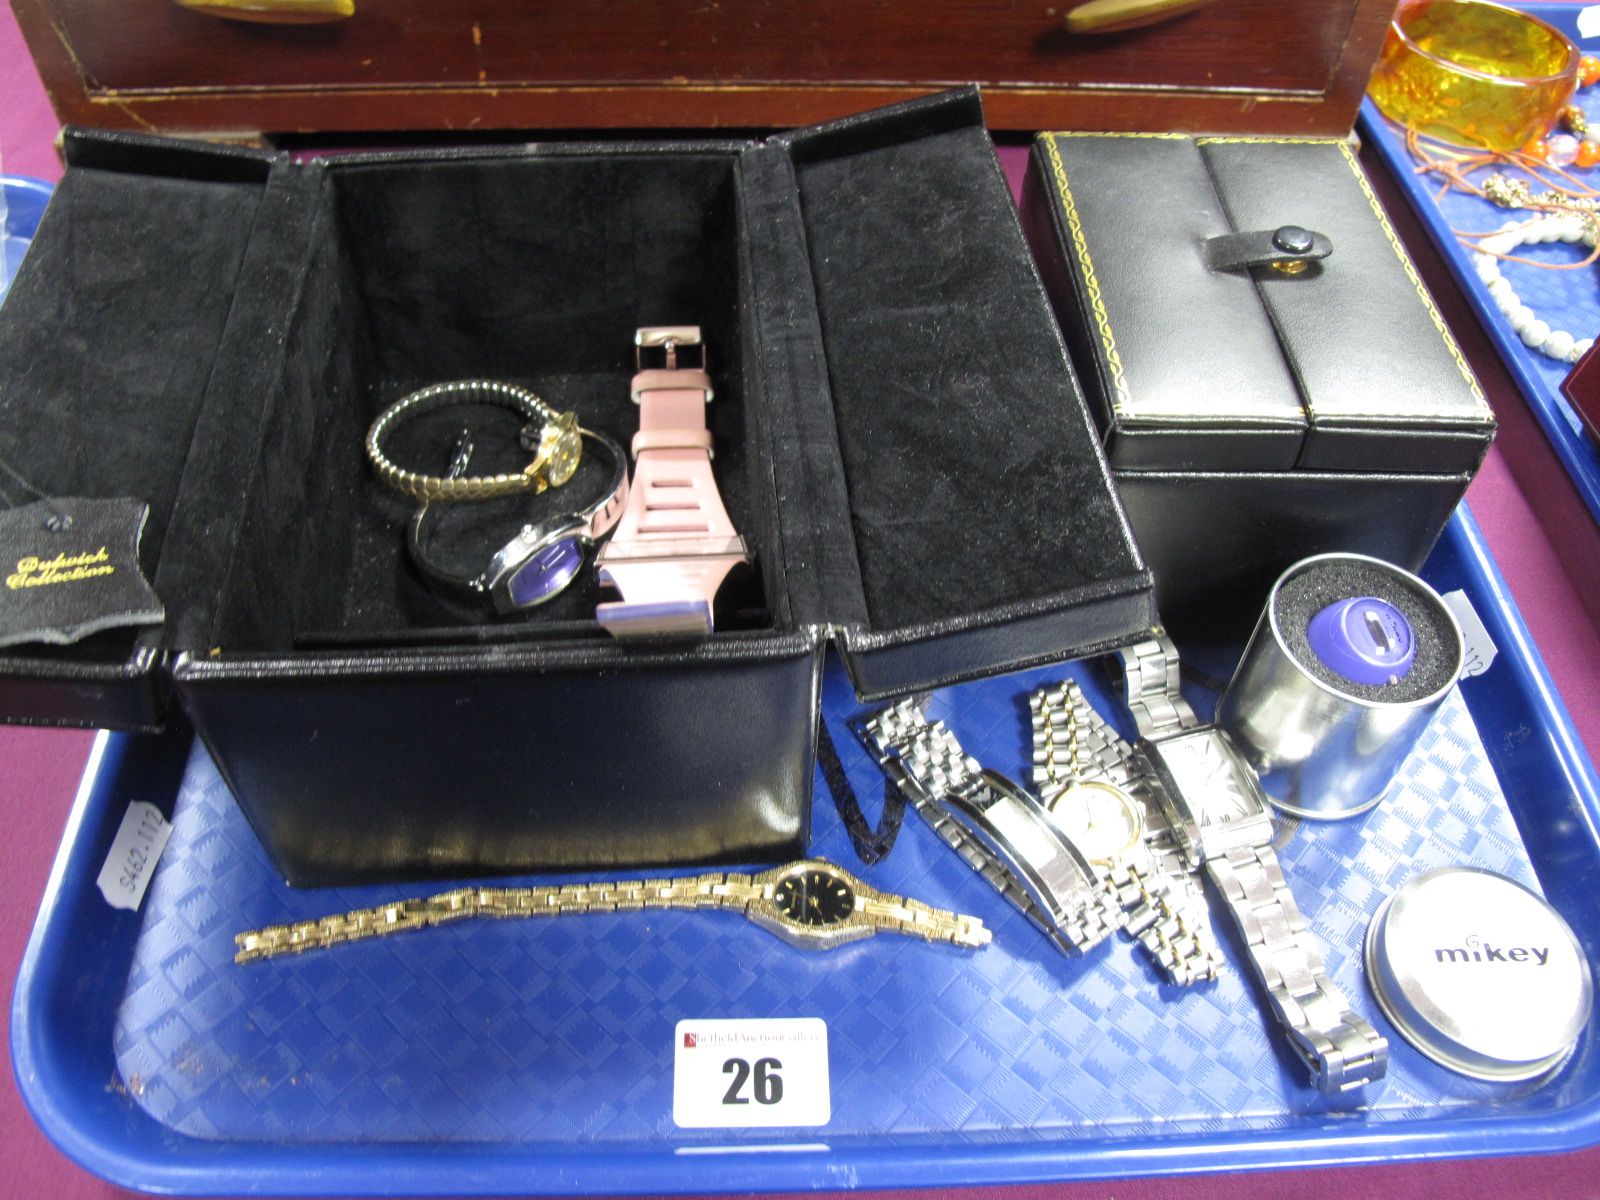 Ladies Wristwatches, novelty 'Mickey' ring watch, leather jewel cases:- One Tray